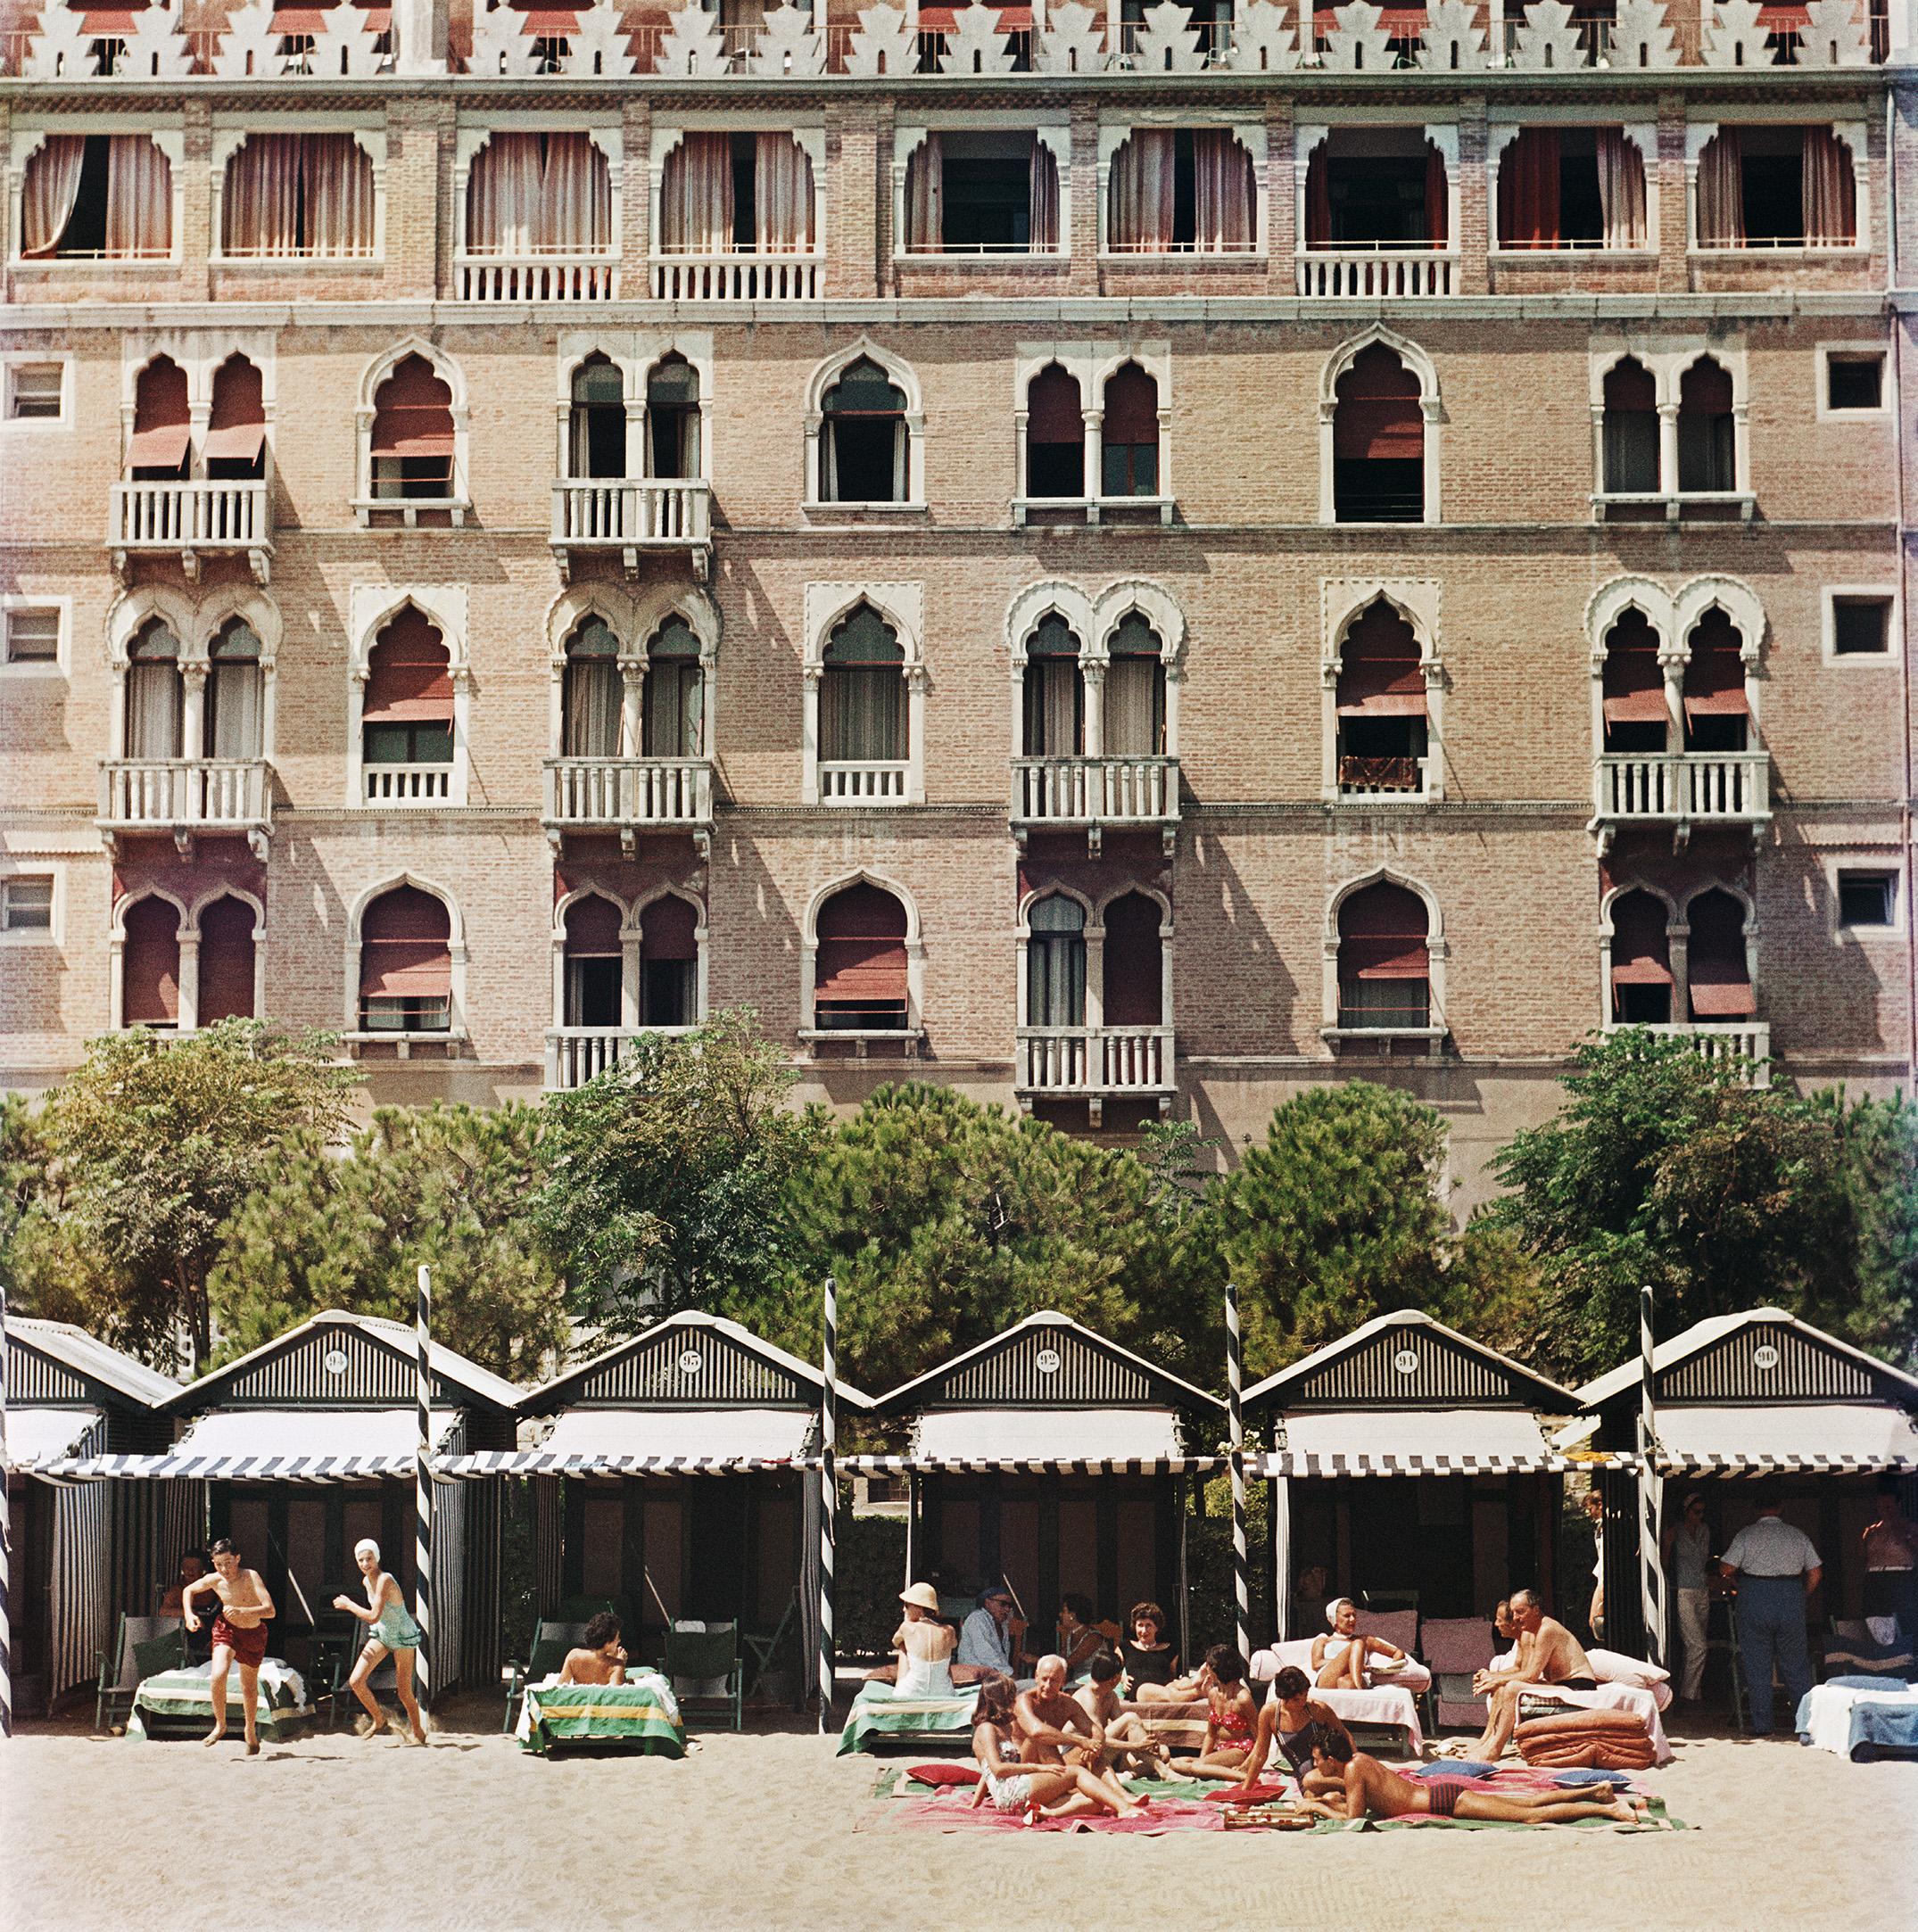 Hotel Excelsior 

1957 1957 Slim Aarons Estate Stamped Edition C print 


The beach front of the luxurious Excelsior Hotel on the Venice Lido, 1957. 
Photo by Slim Aarons

Extra large oversize 40x40” / 101 x 101 cm - paper size 
C print
unframed